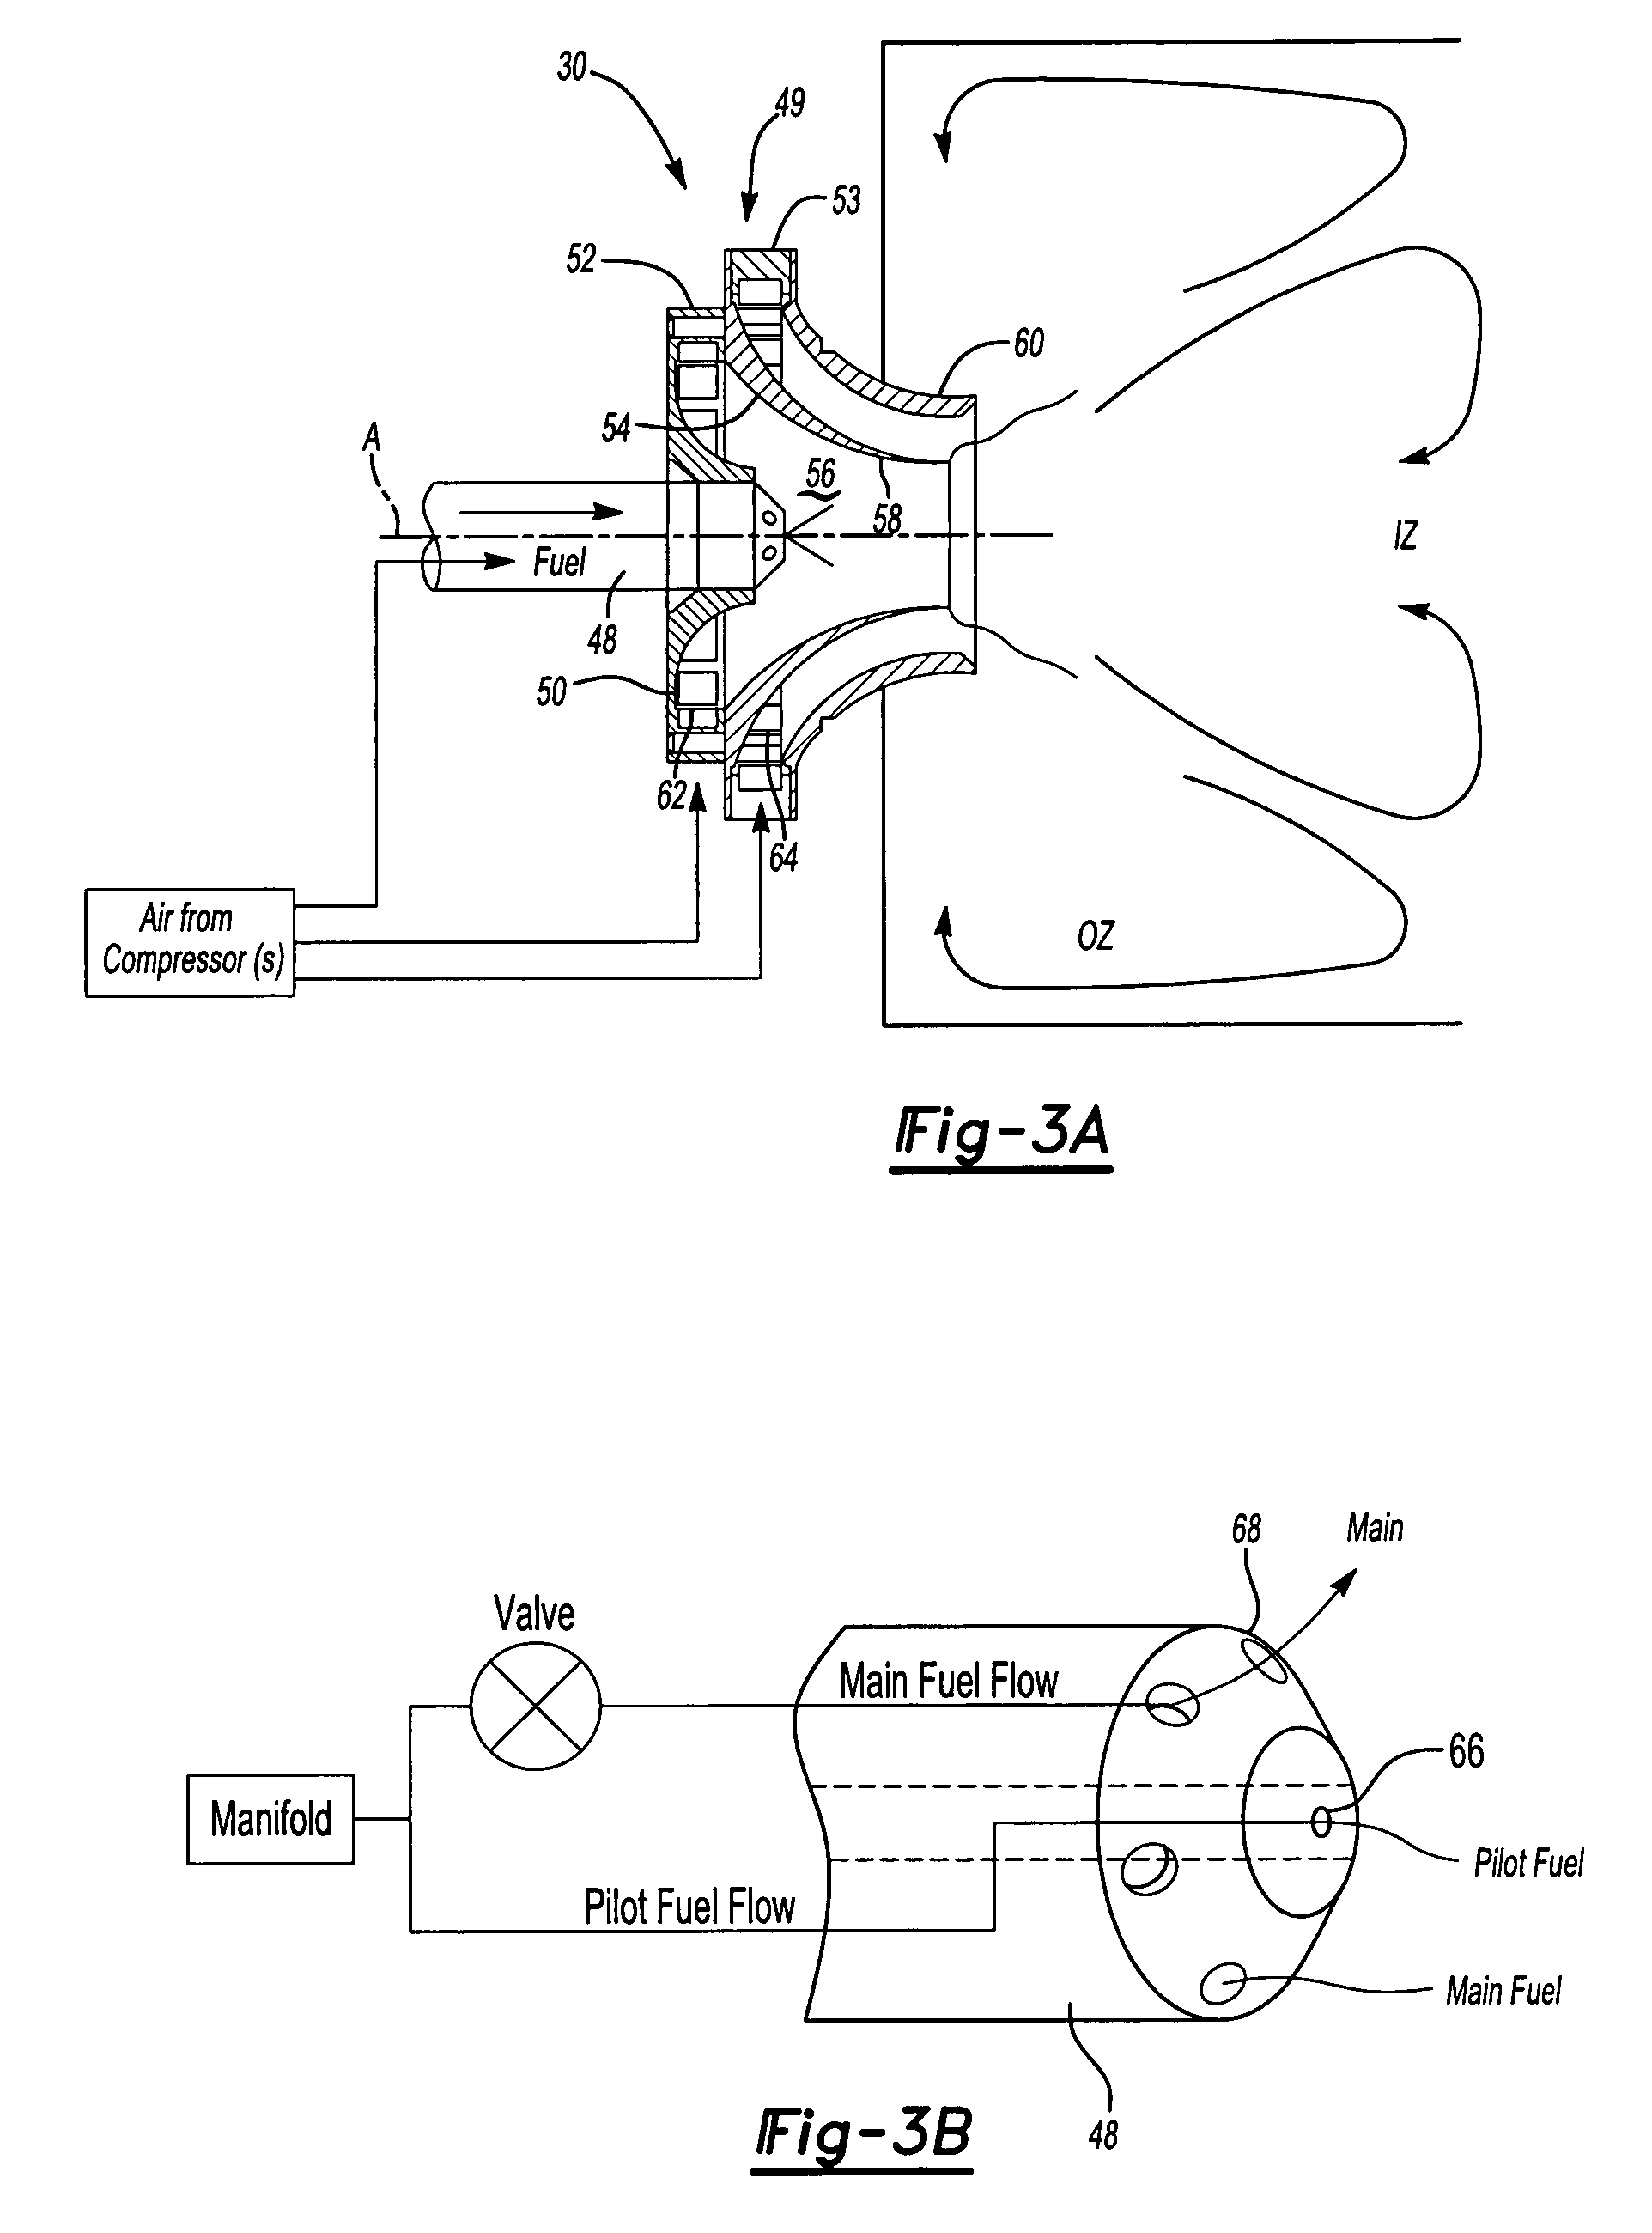 Air assist fuel injector for a combustor